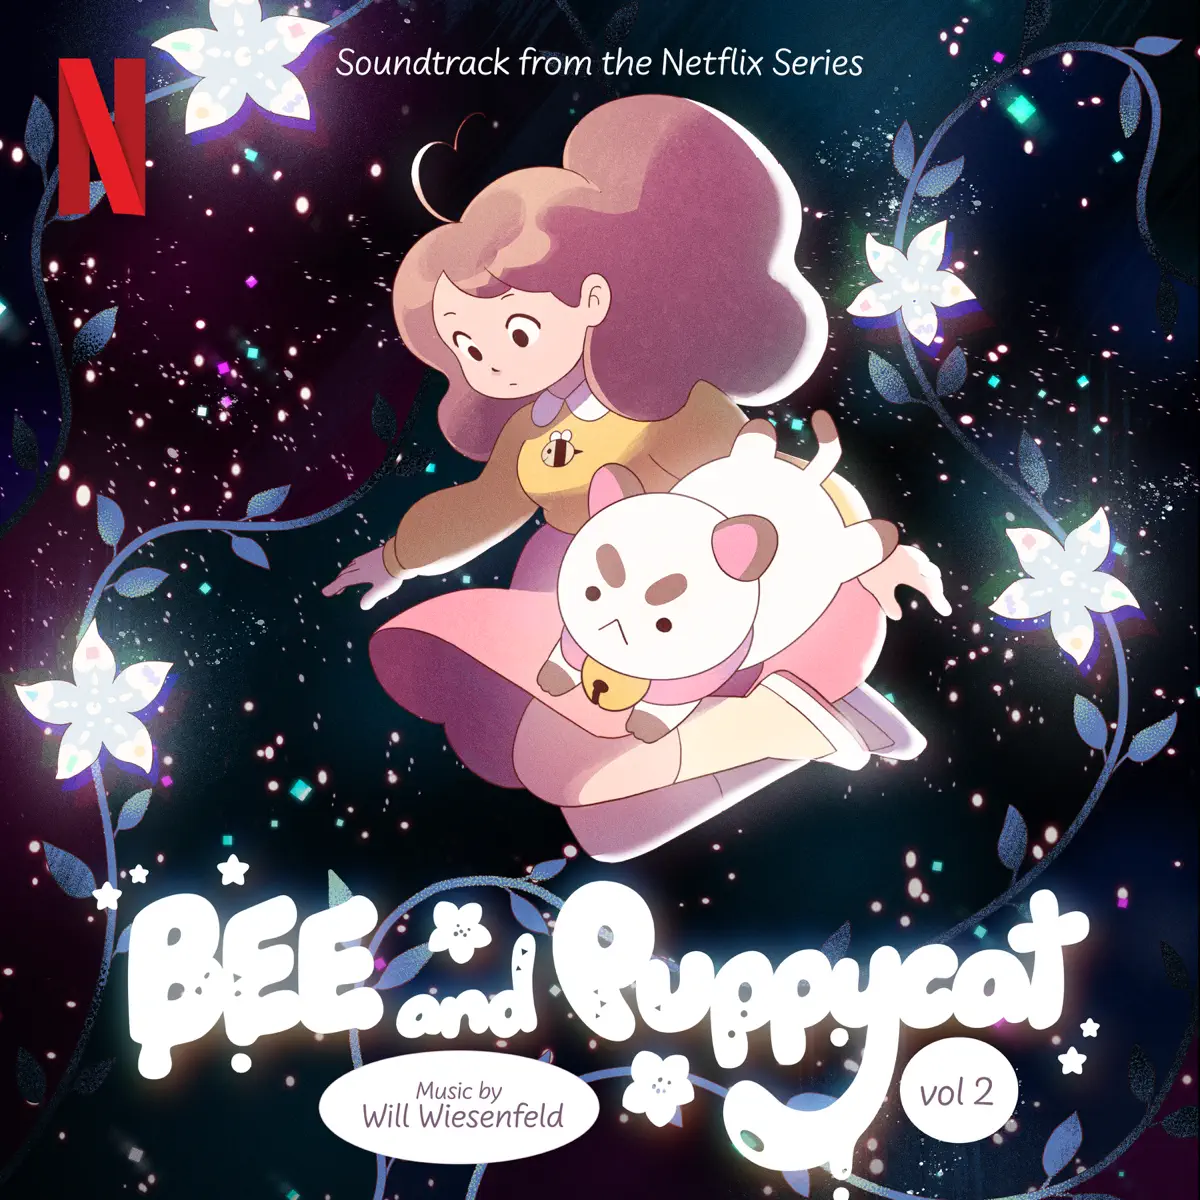 Will Wiesenfeld, Baths & Geotic - 蜂妹与狗狗猫 Bee and PuppyCat (Soundtrack from the Netflix Series) Vol. 2 (2023) [iTunes Plus AAC M4A]-新房子